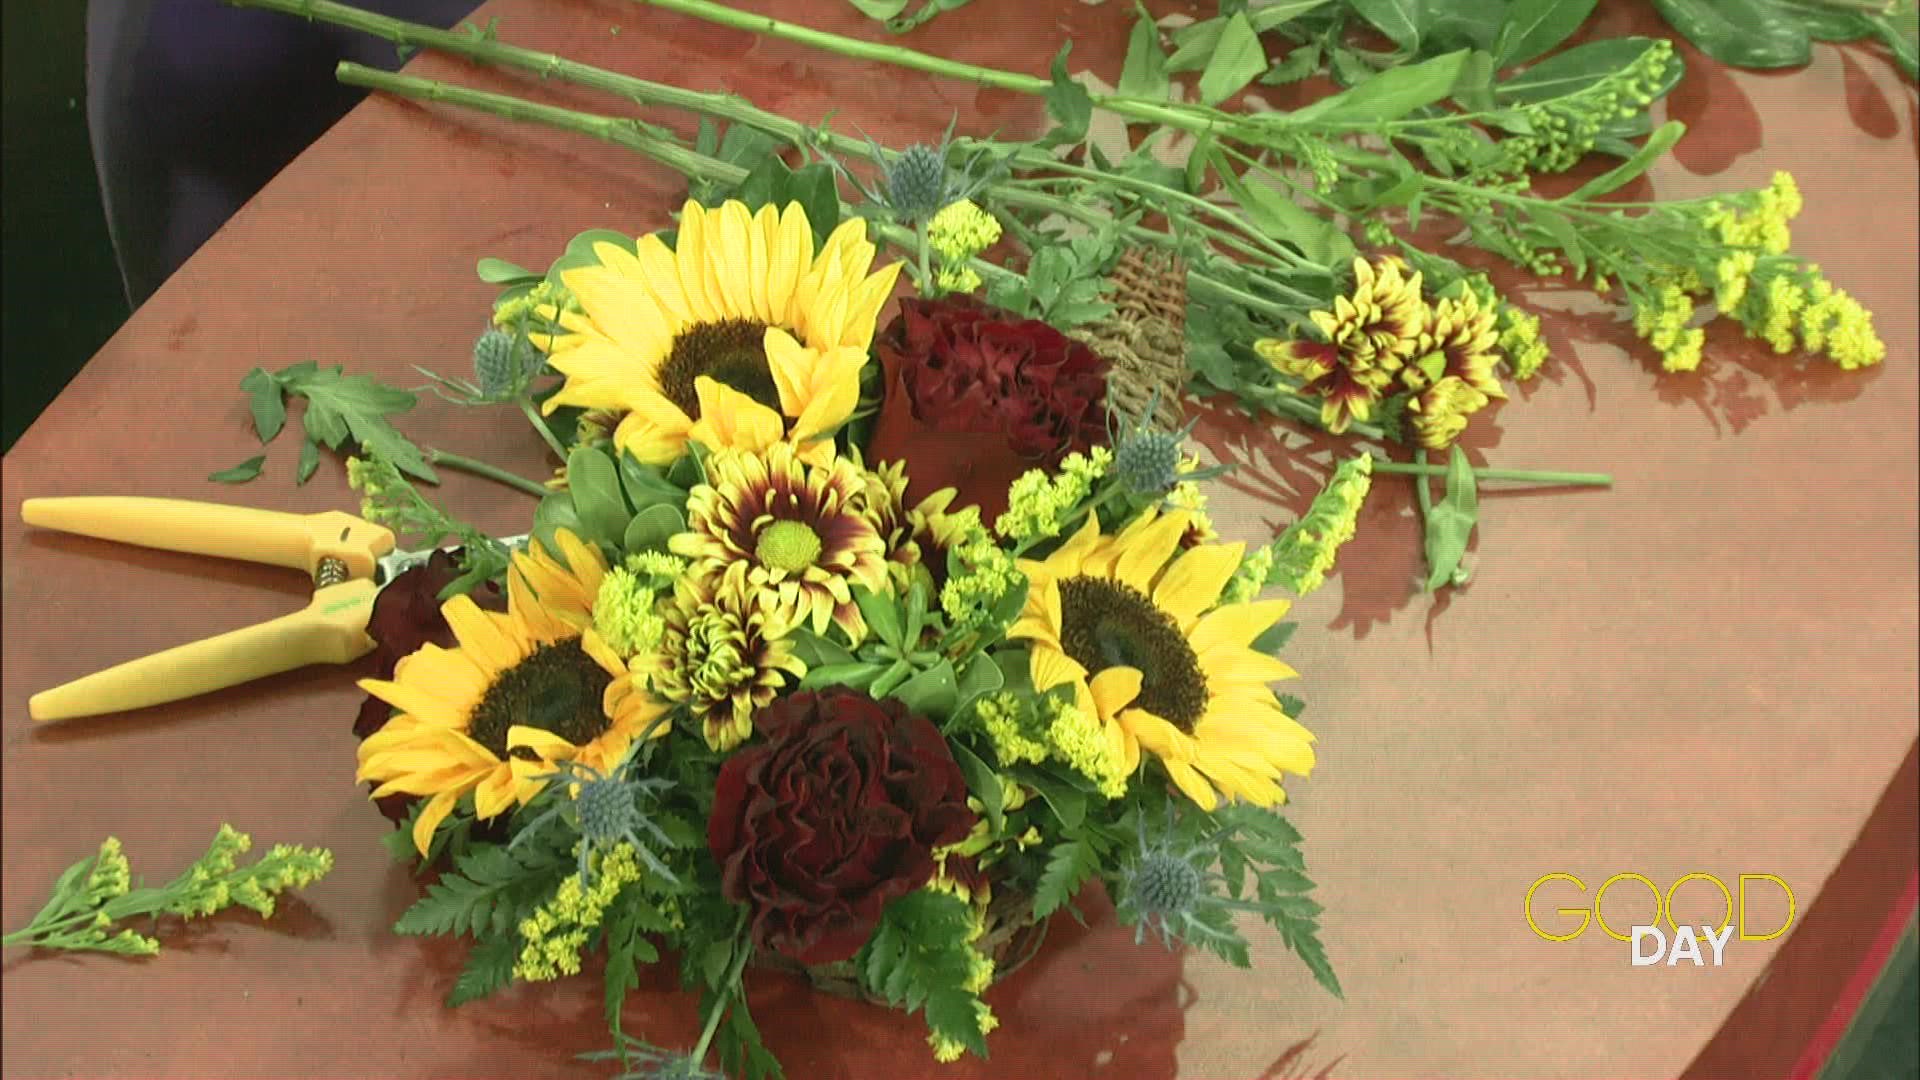 Florist Jen Linehan shows one way you can deck out your holiday dinner table with DIY crafts.